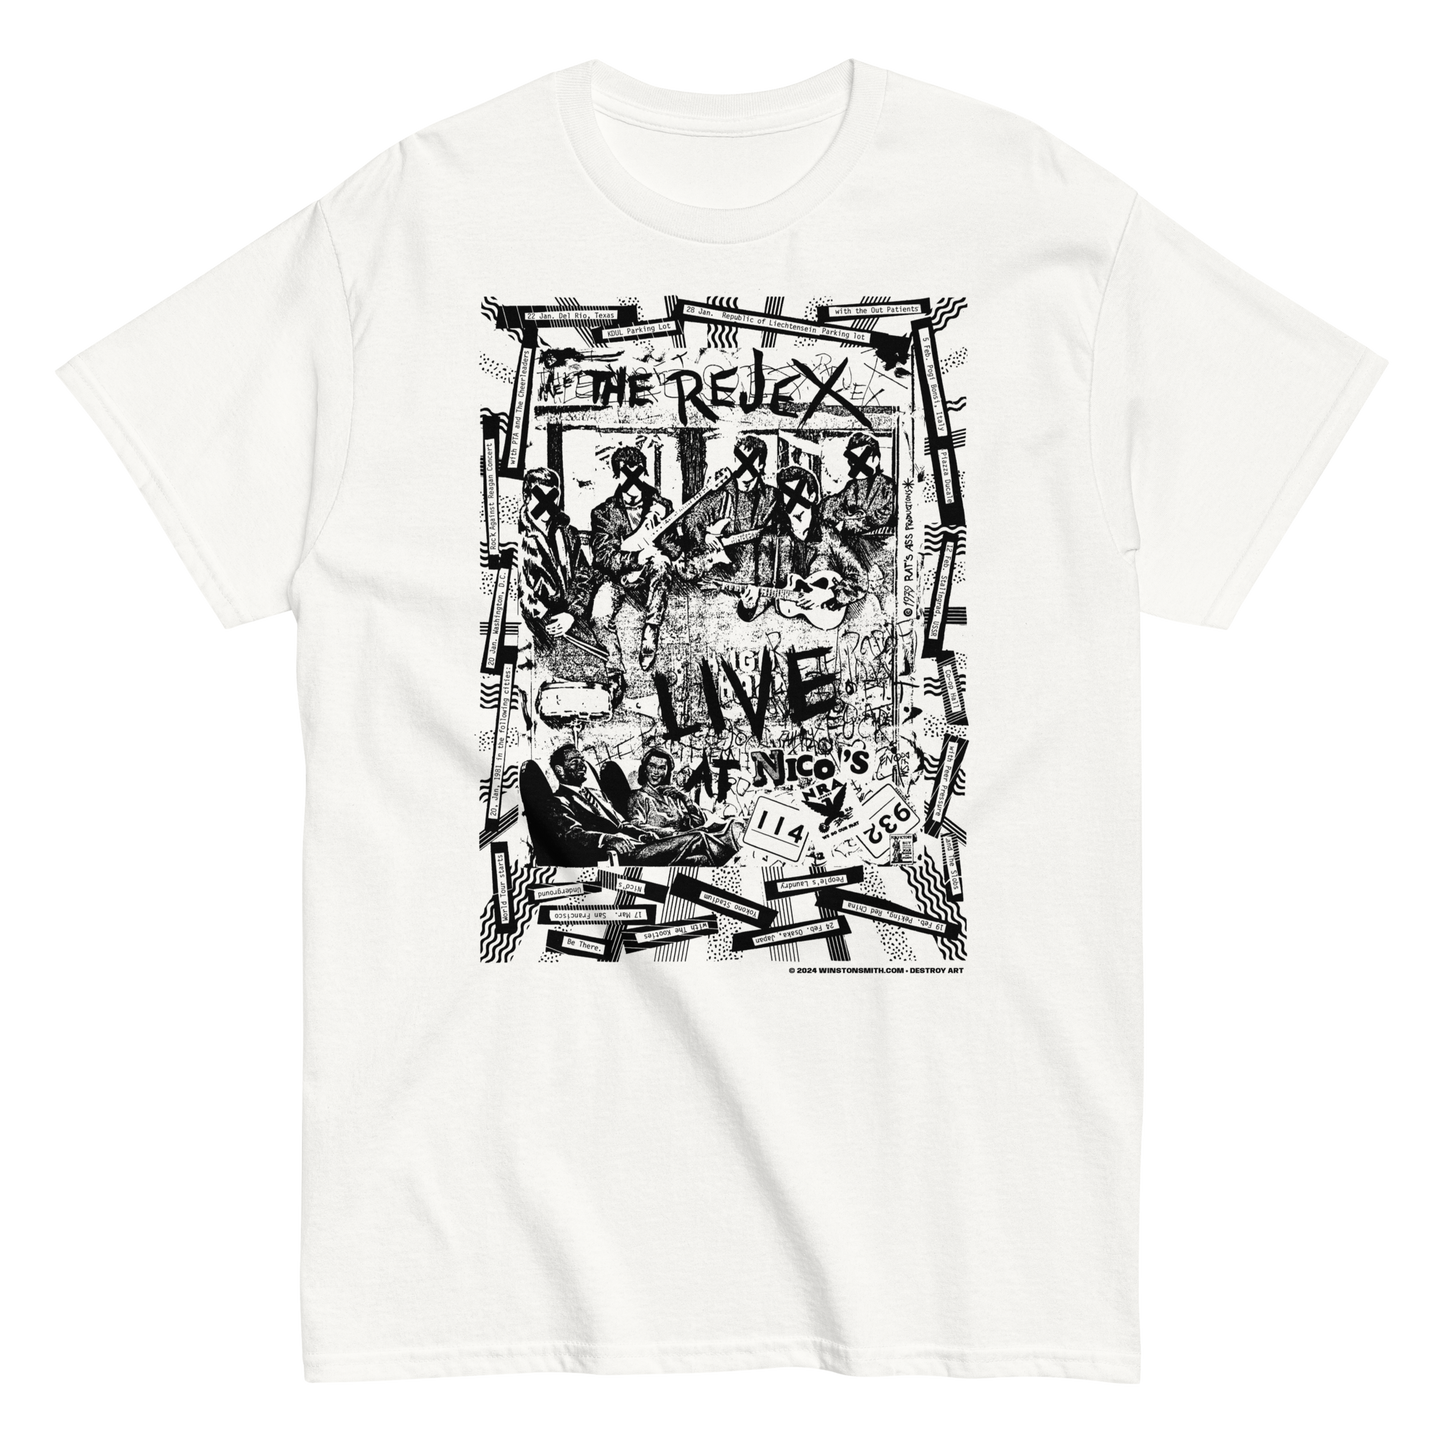 Winston Smith "The Rejex" Fake Flyers Tee